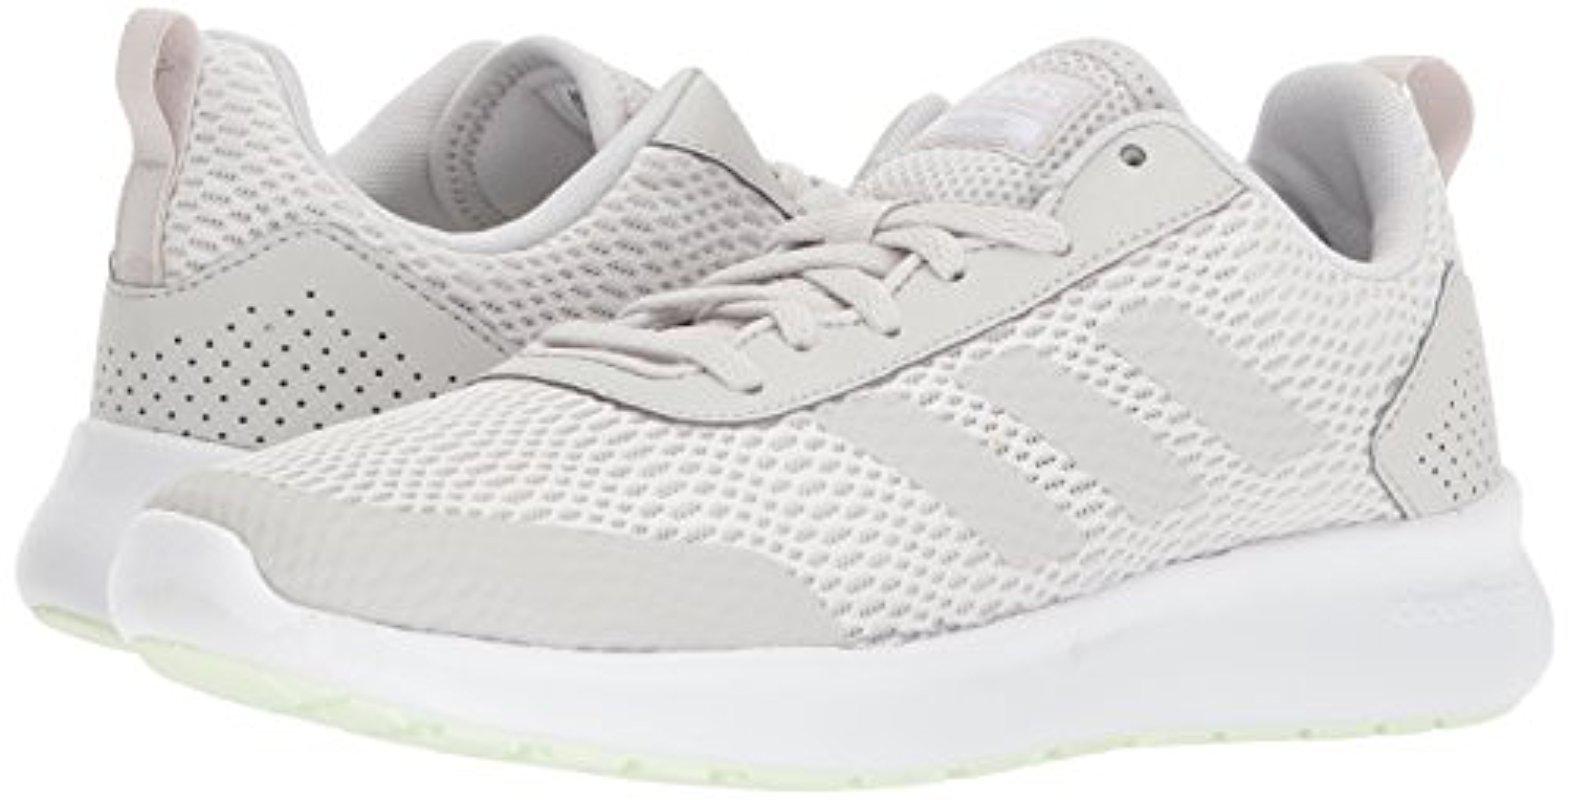 adidas Performance Cf Element Race W Running Shoe in White - Save 43% - Lyst